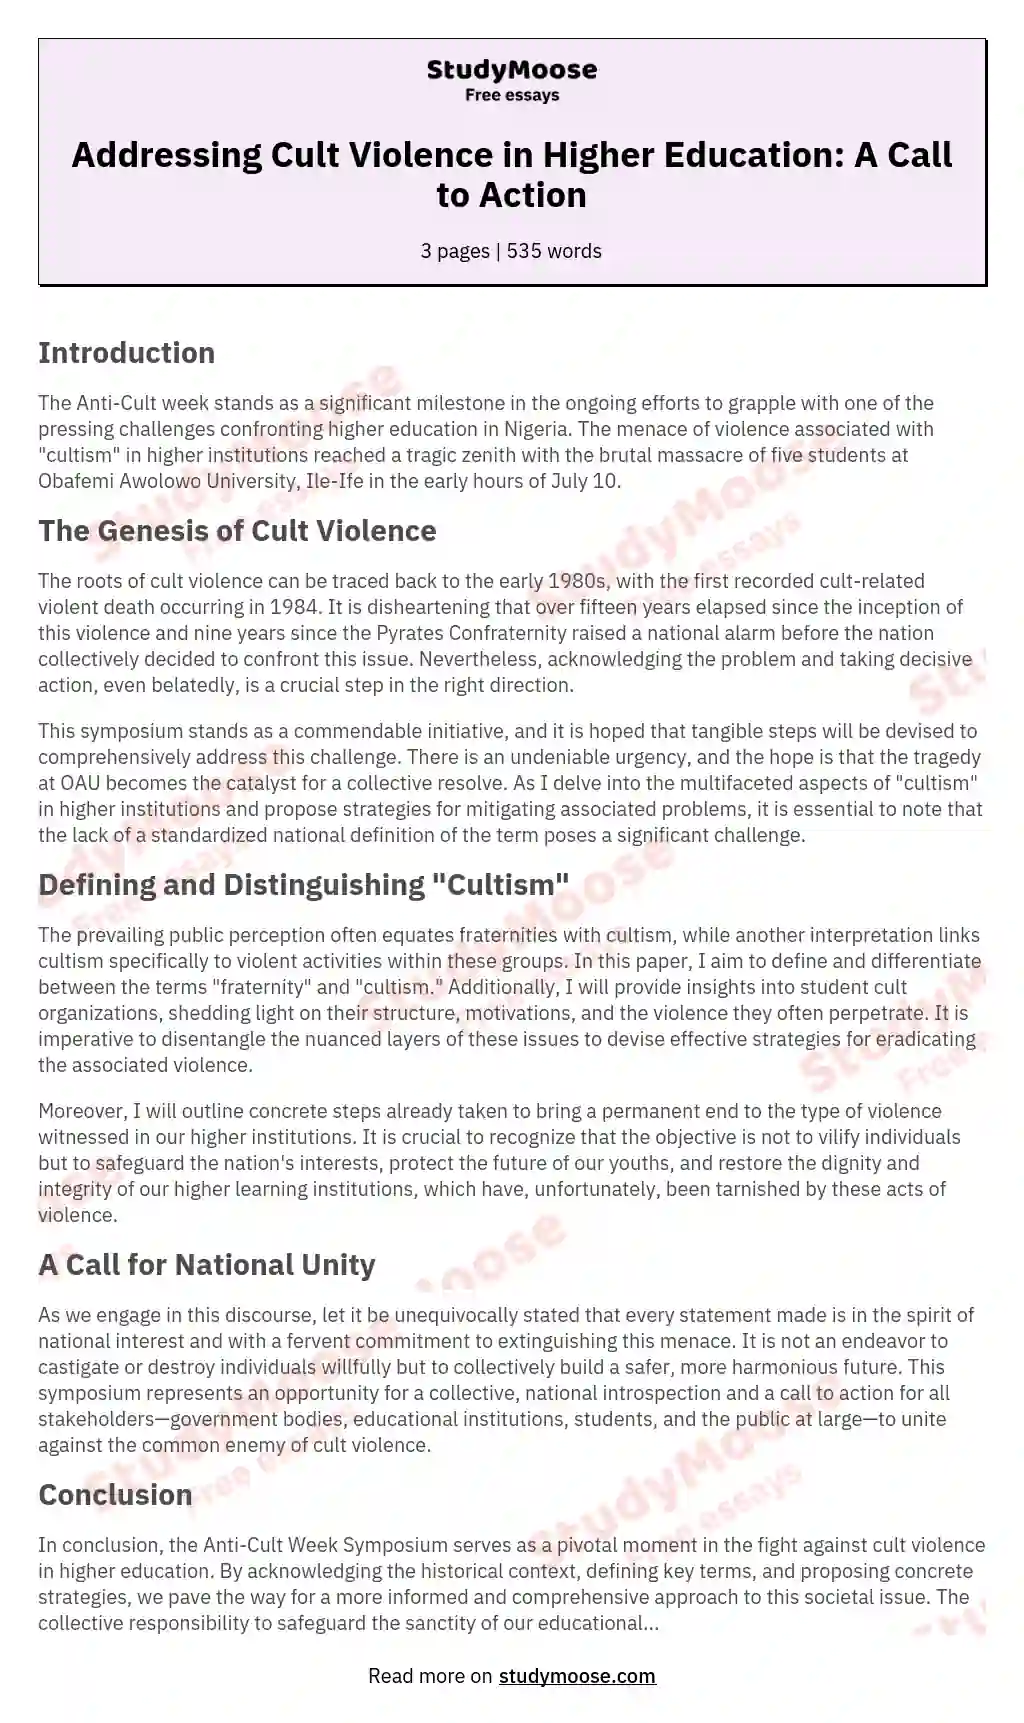 Addressing Cult Violence in Higher Education: A Call to Action essay